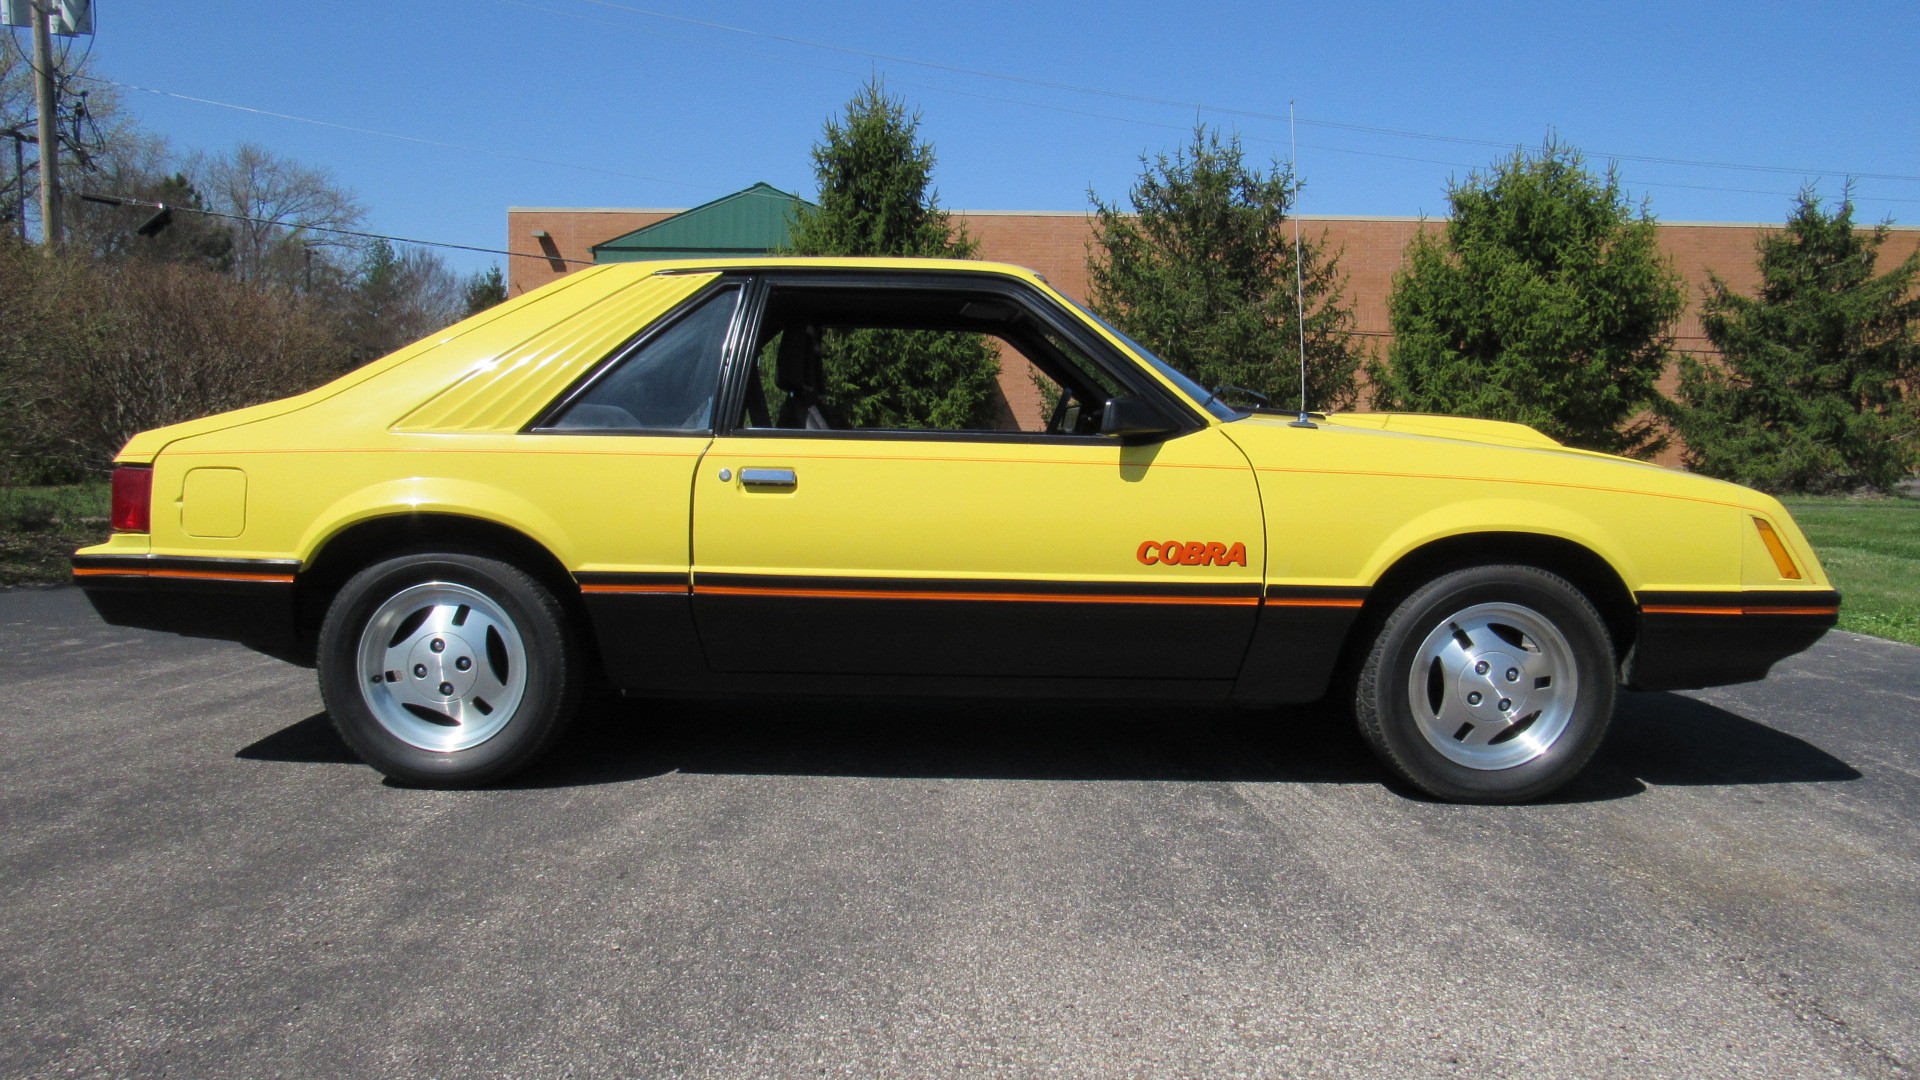 1979 Ford Mustang Cobra, 10K miles, Auto, SOLD!